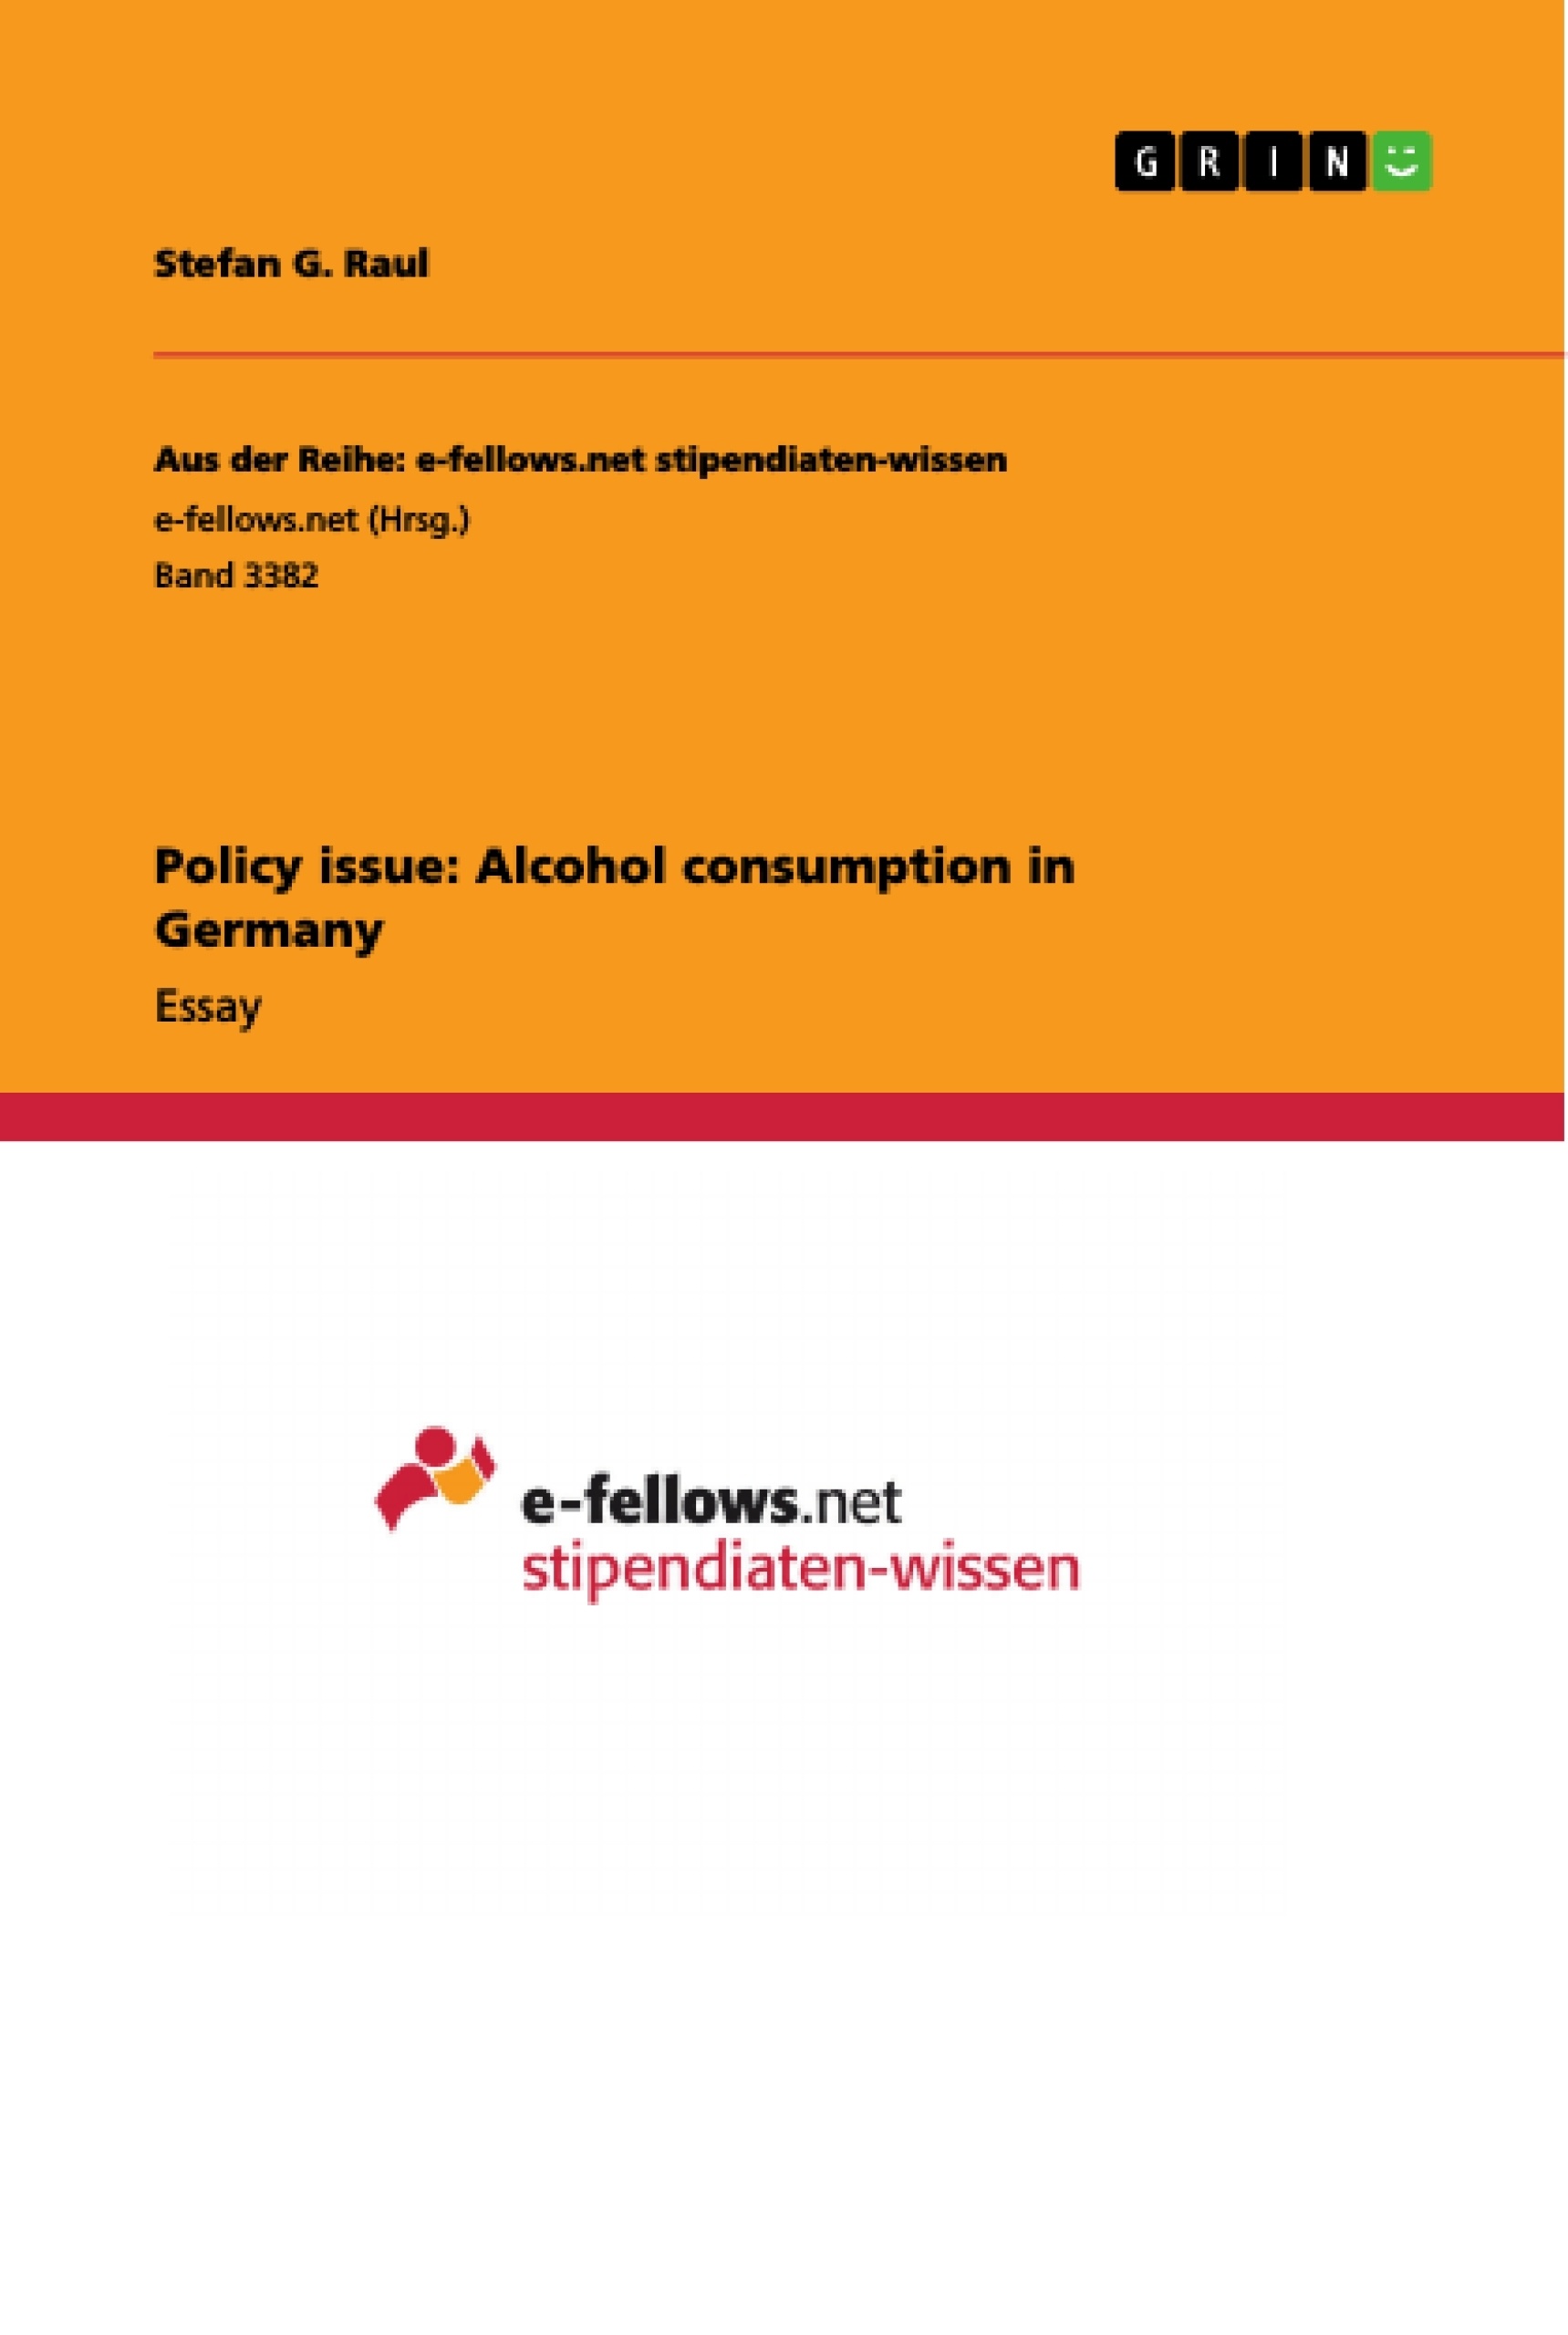 Título: Policy issue: Alcohol consumption in Germany